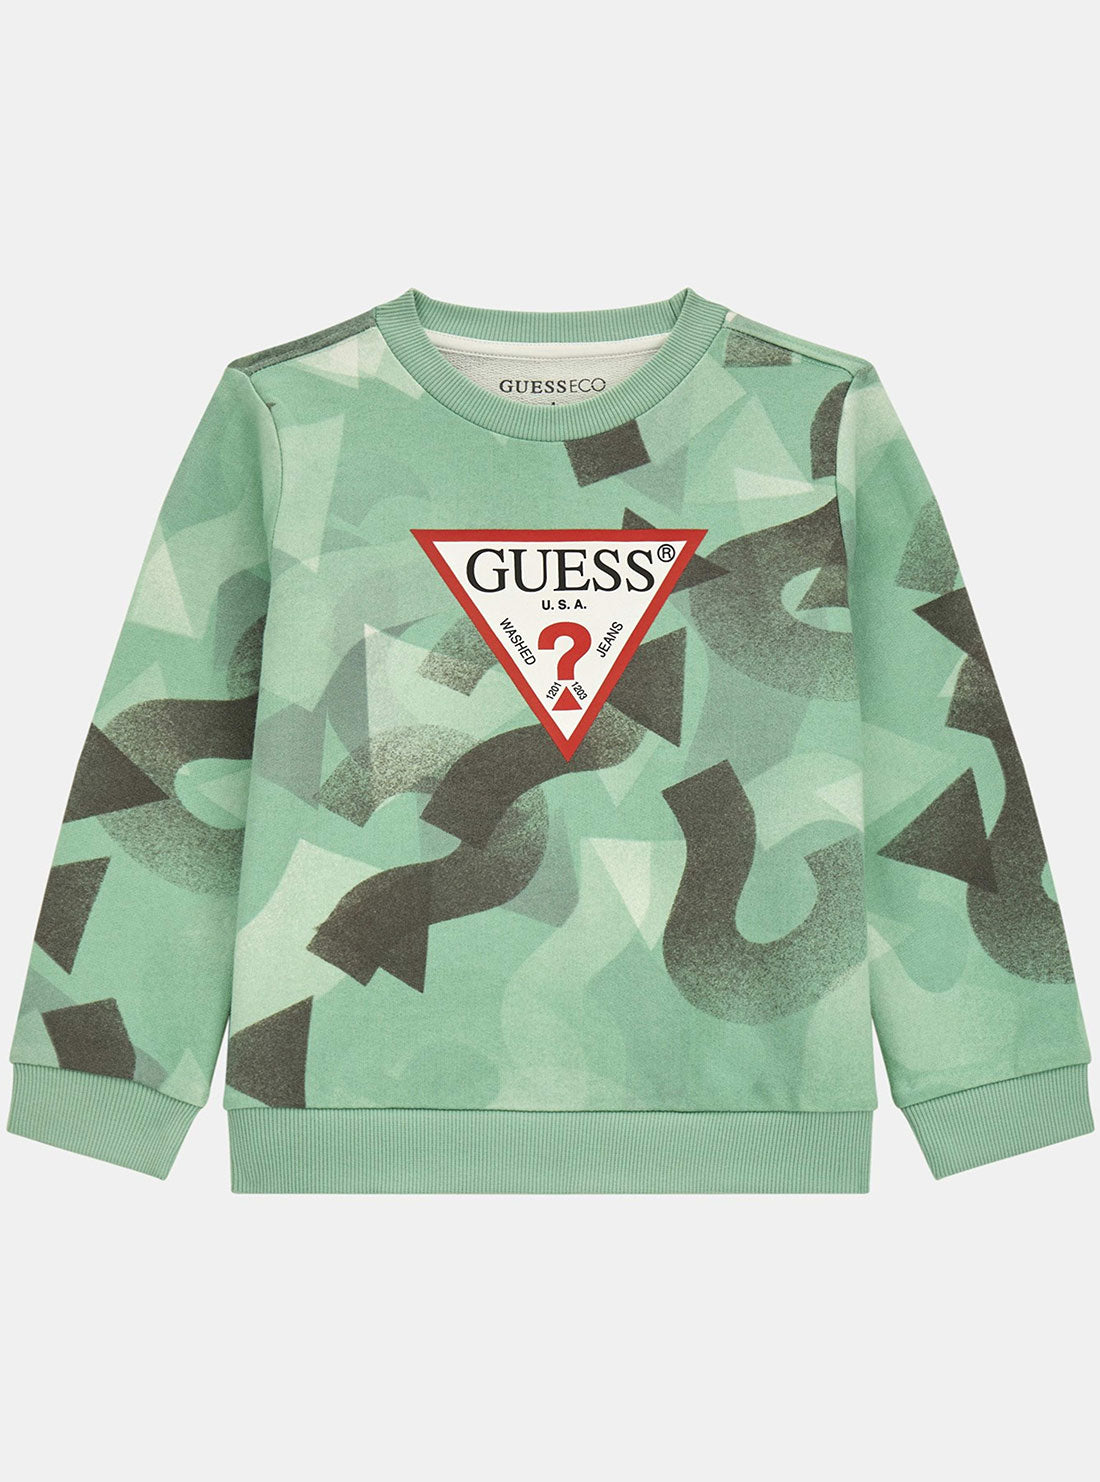 GUESS Green Long Sleeve Active Top (2-7) front view